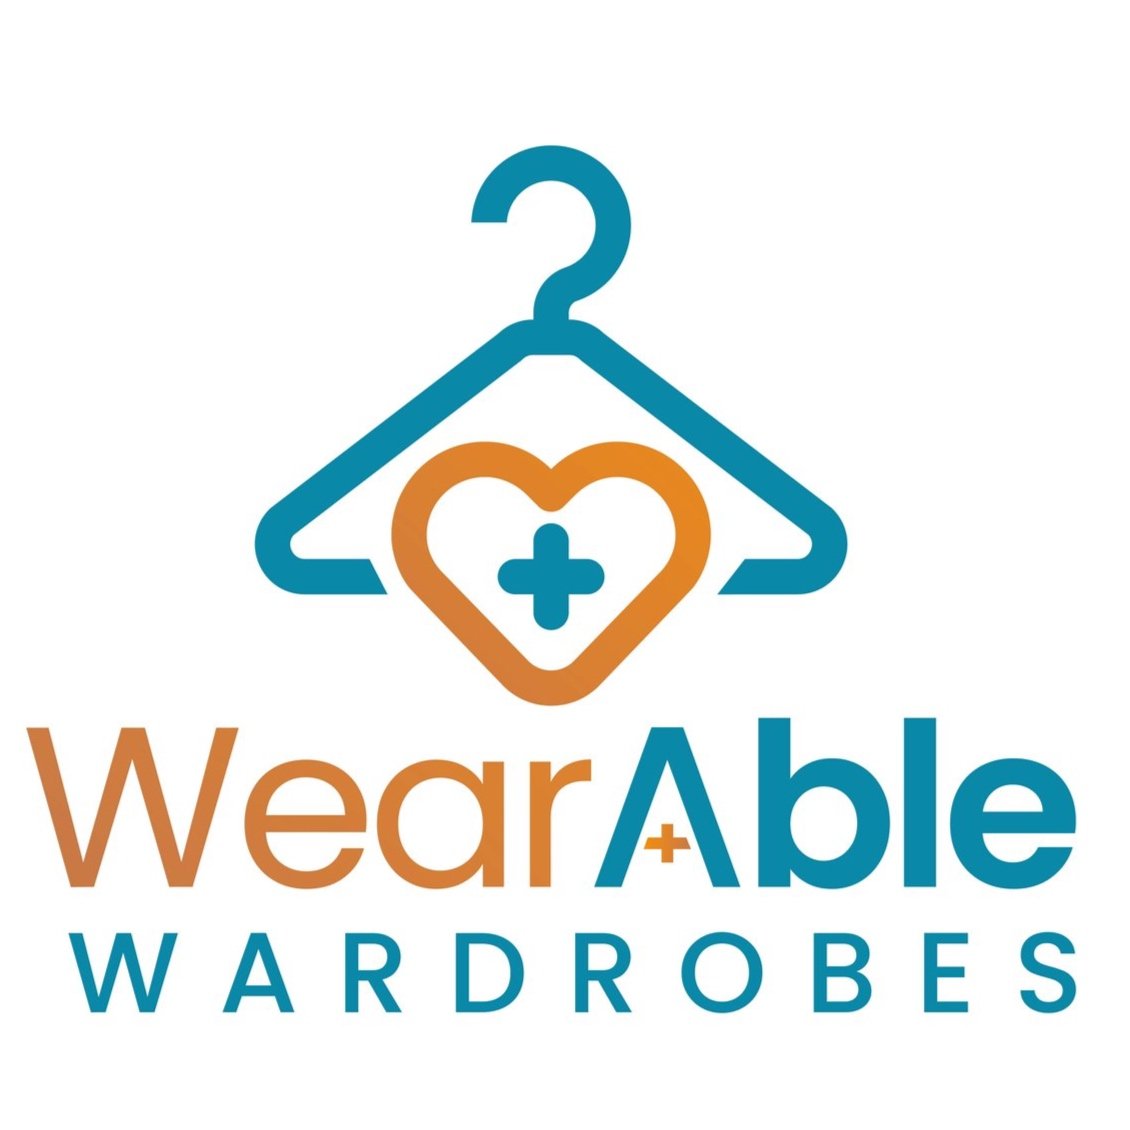 WearAble Wardrobes with Dr Gina KINGSTON